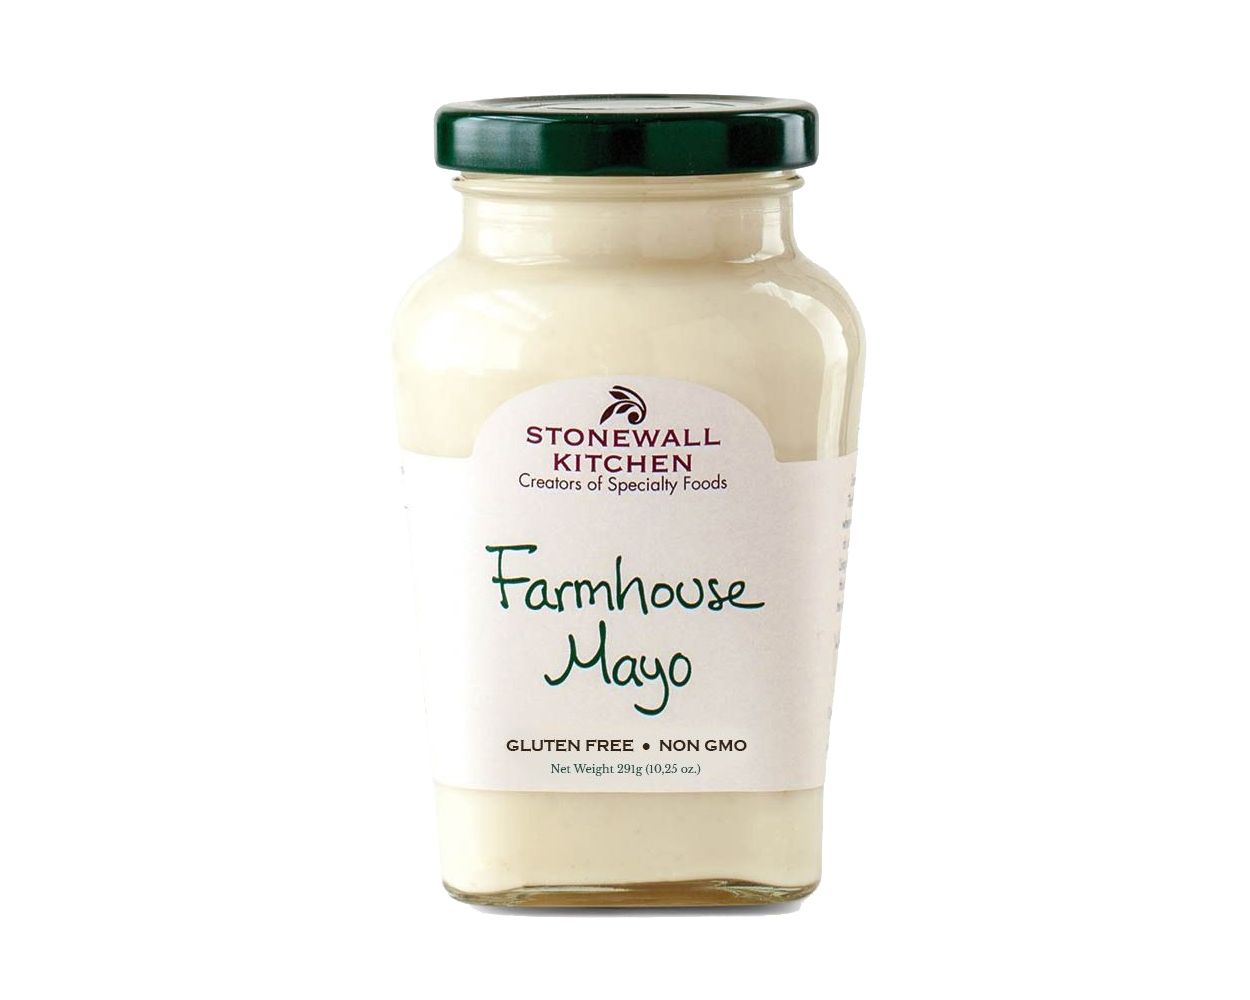 Farmhouse Mayo from Stonewall Kitchen | American Heritage 